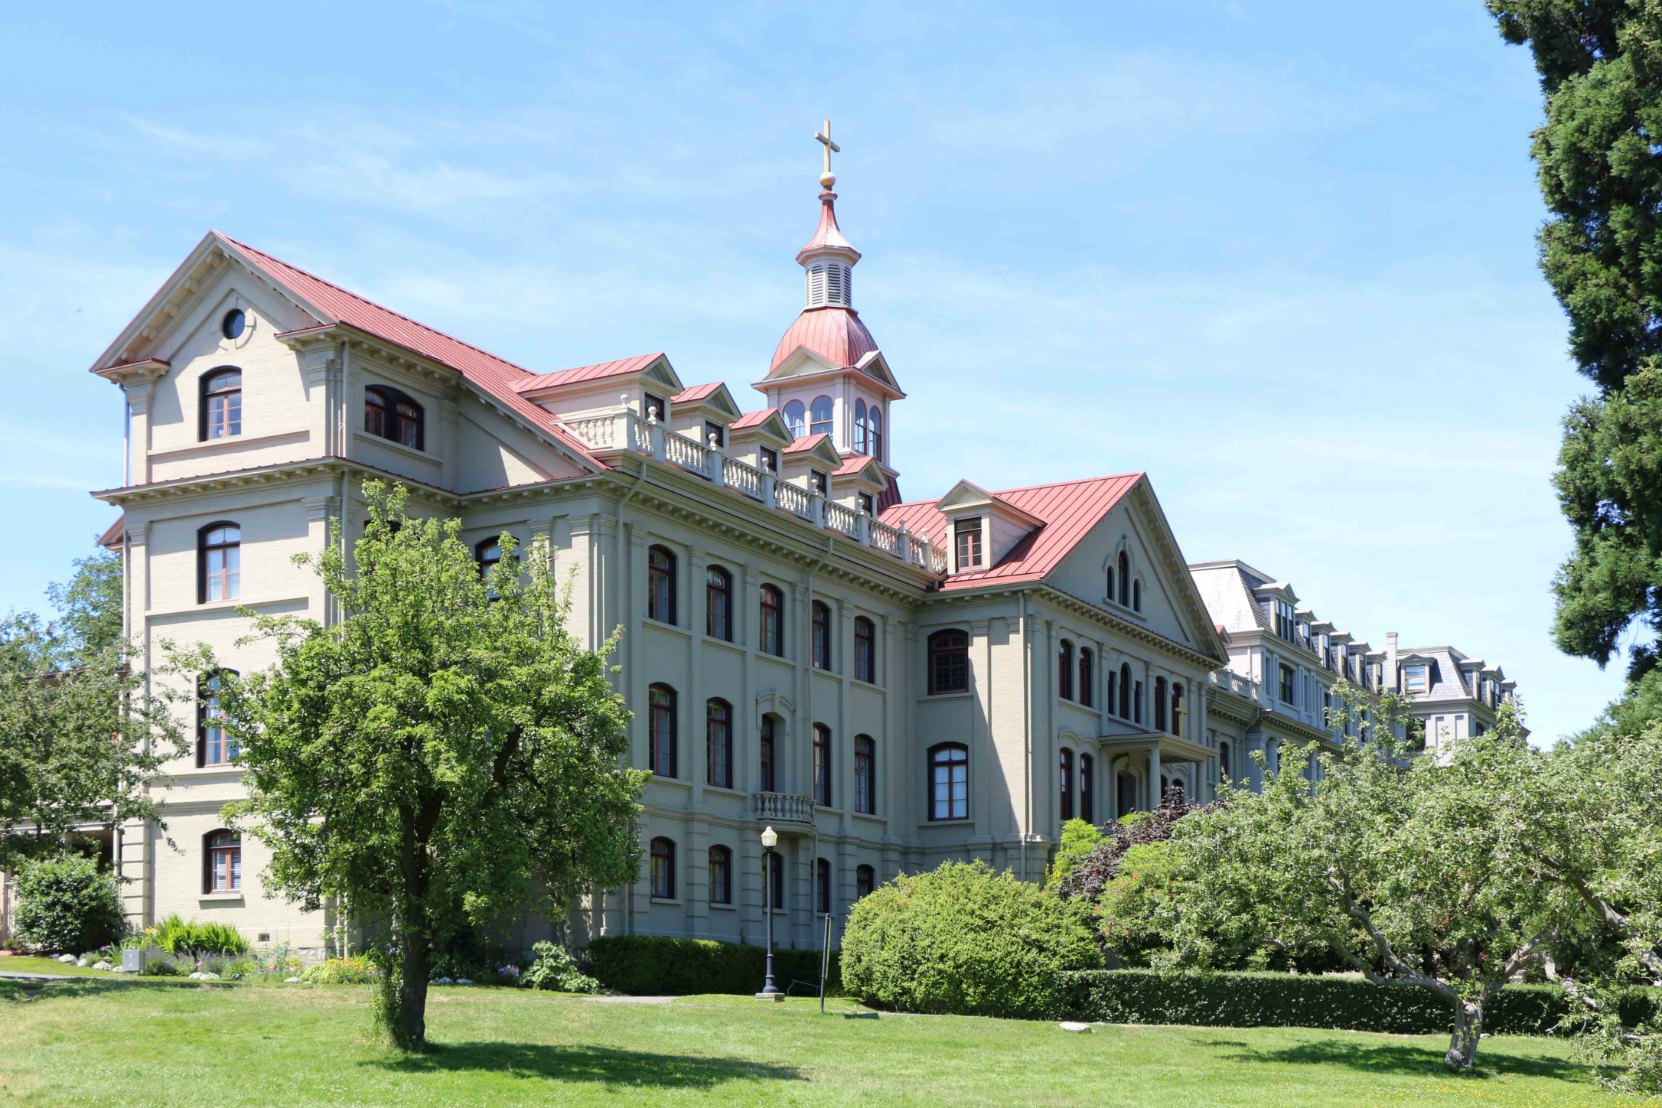 St. Ann's Academy, 835 Humboldt Street. East wing, viewed from the St. Ann's Academy grounds.